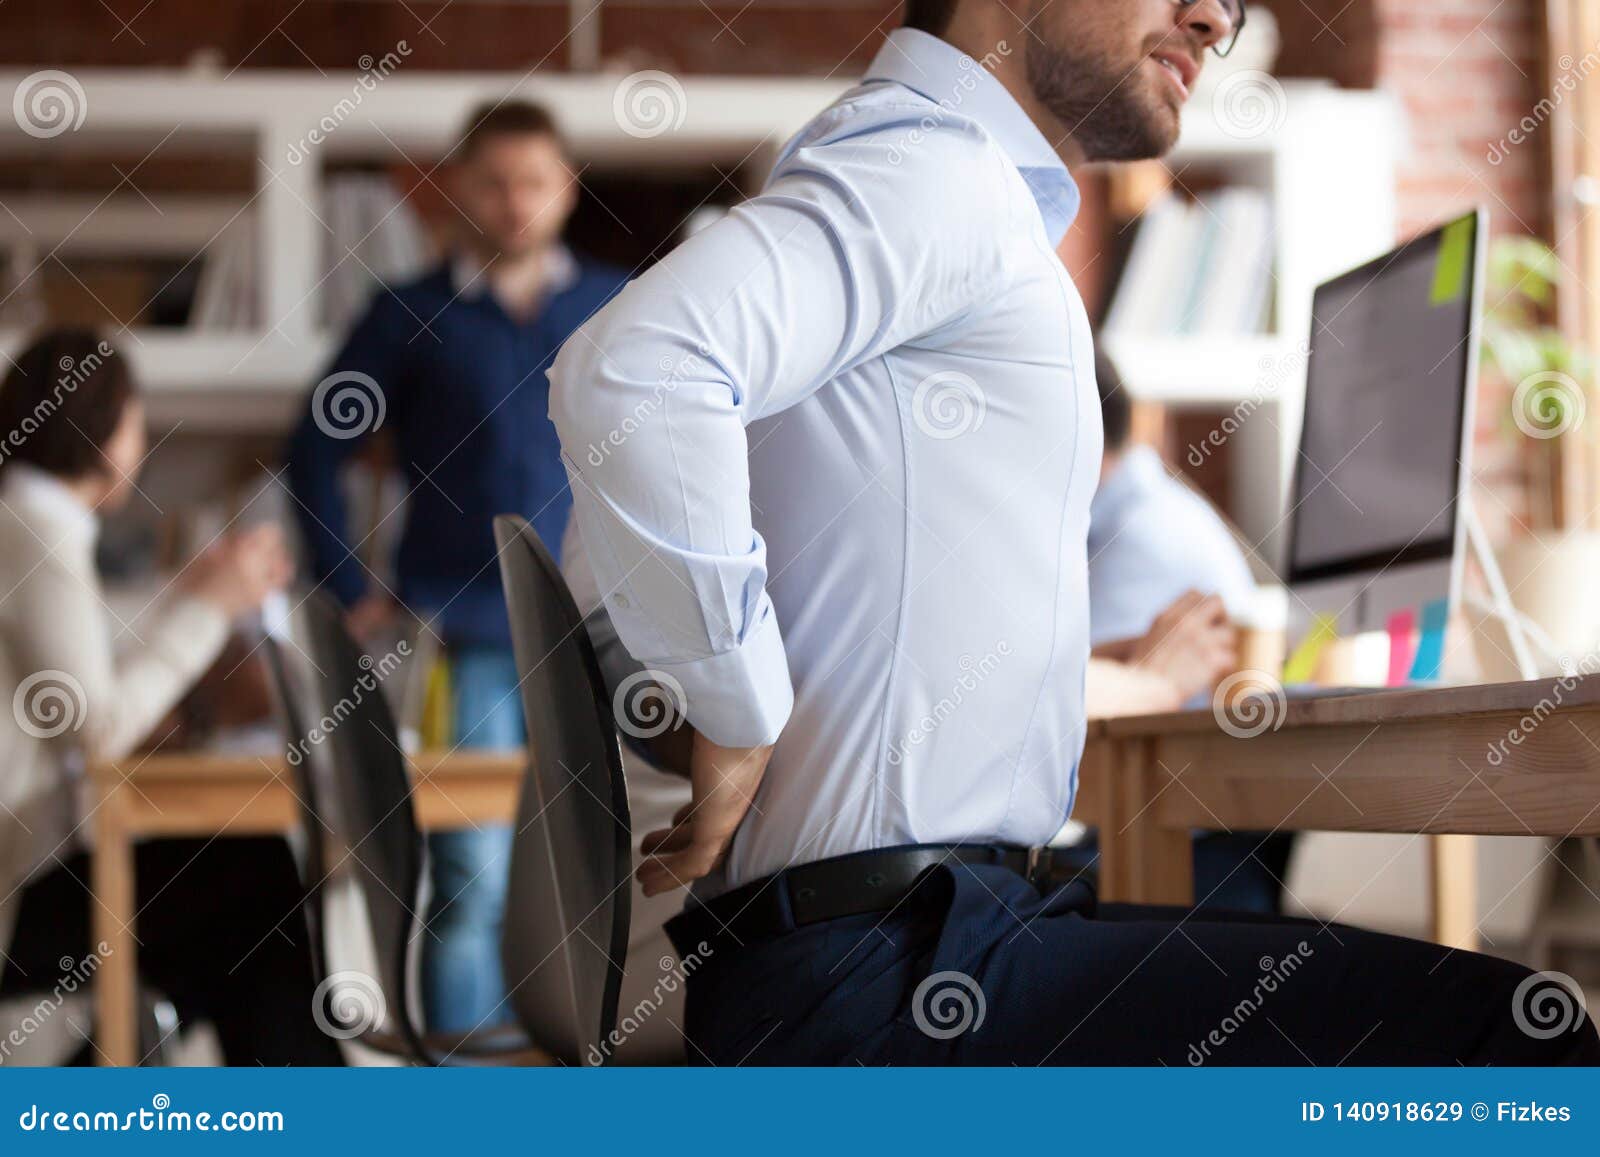 Businessman Suffers From Lower Back Pain Sitting In Shared Office